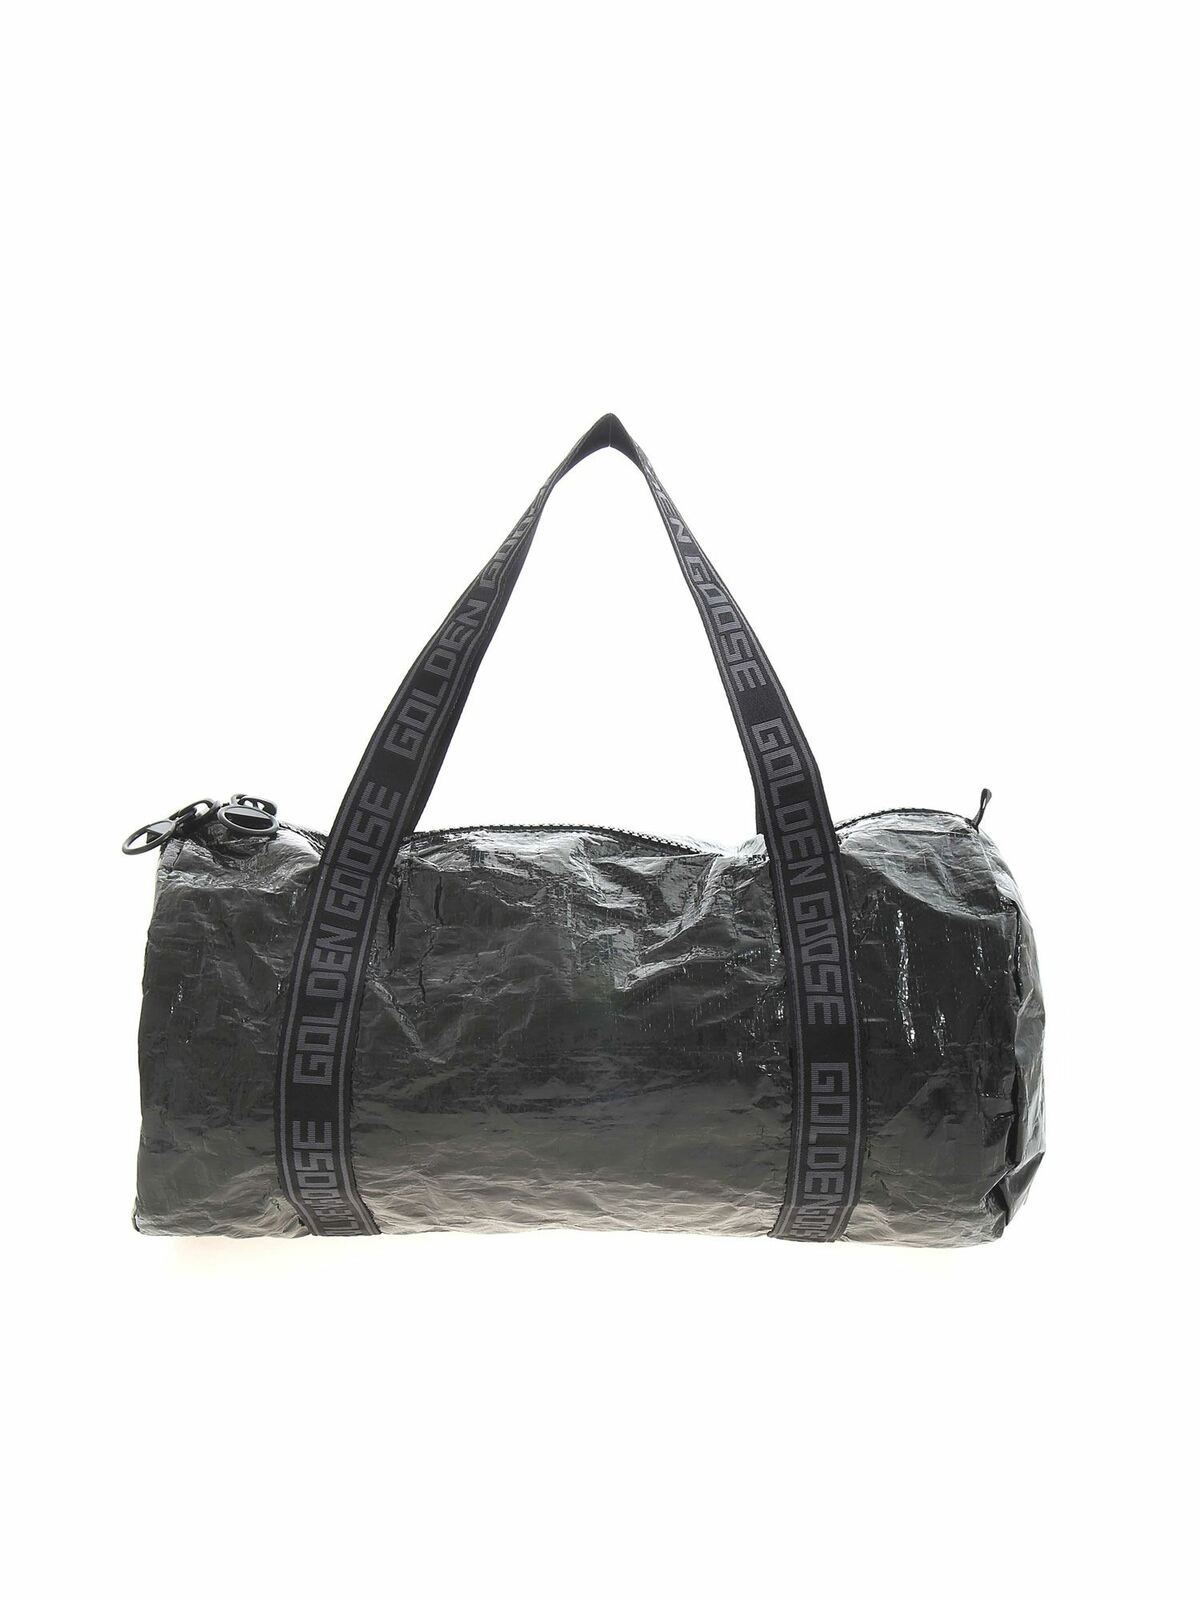 Luggage & Travel bags Golden Goose - Star Gold duffel bag in black ...